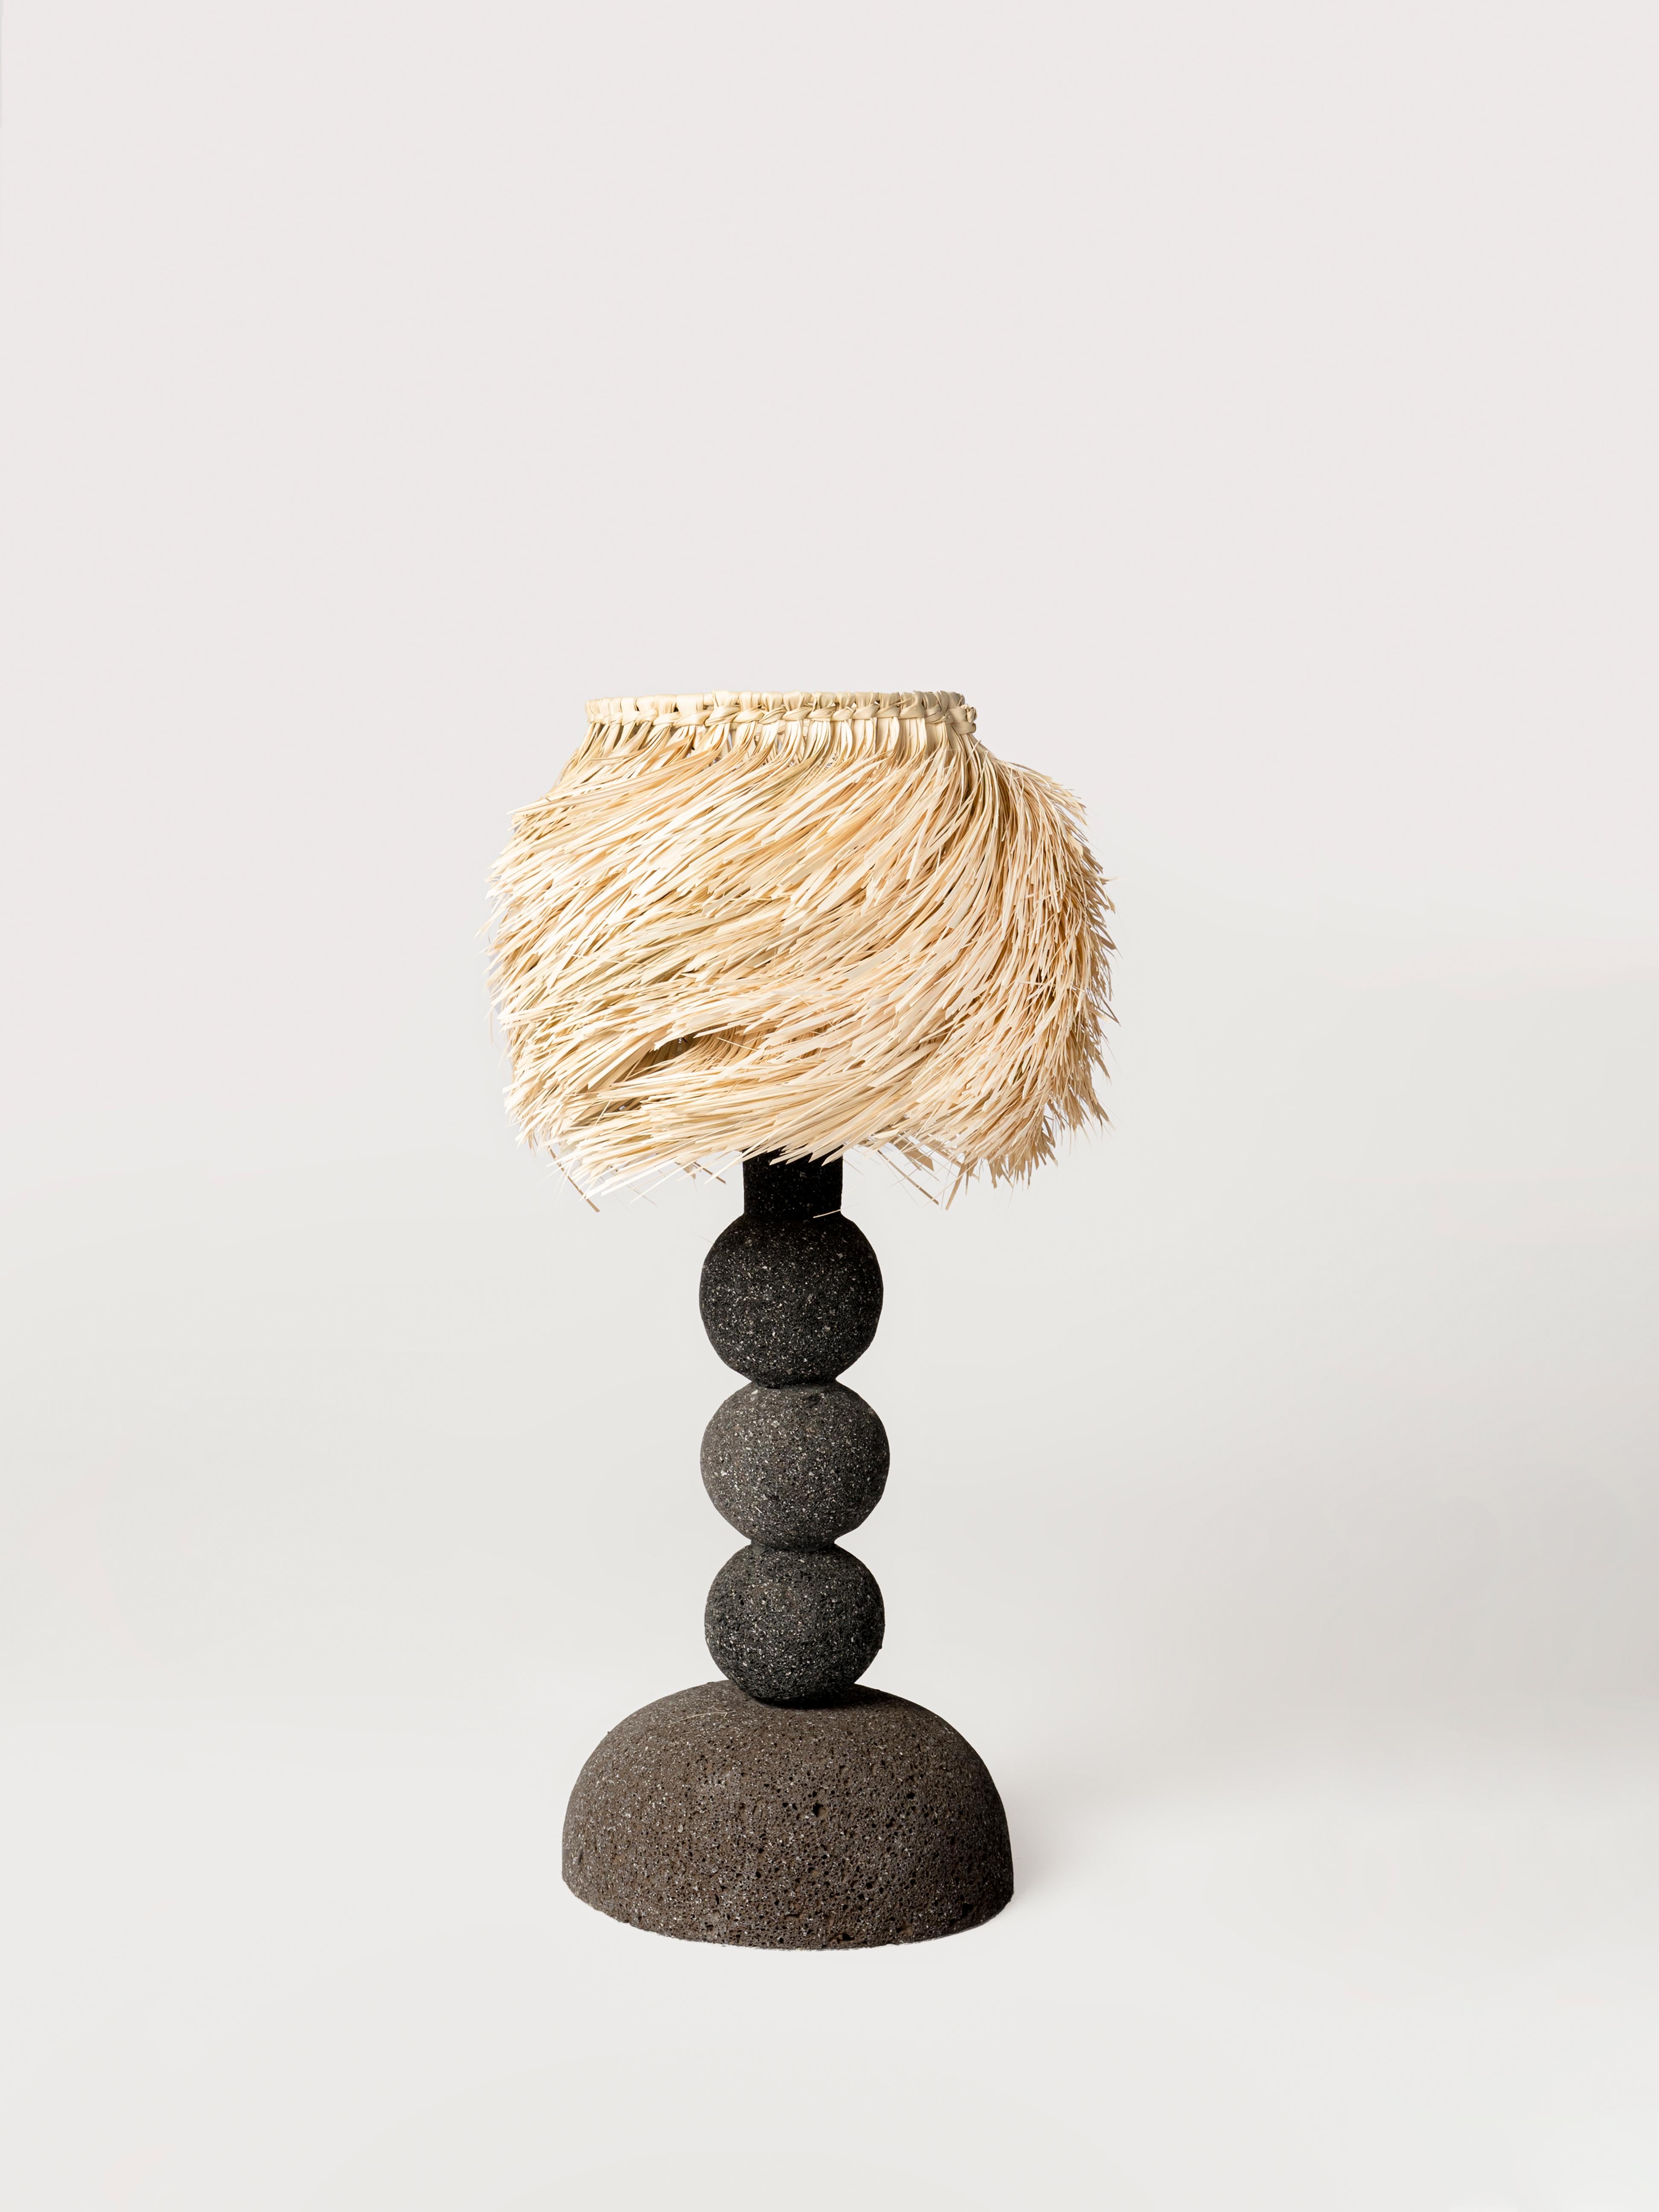 Volcanic Stone Spheres Desk Lamp with Palm Screen by Daniel Orozco.
Dimensions: D 30 x H 45 cm.
Materials: Volcanic stone, palm screen.

All our lamps can be wired according to each country. If sold to the USA it will be wired for the USA for